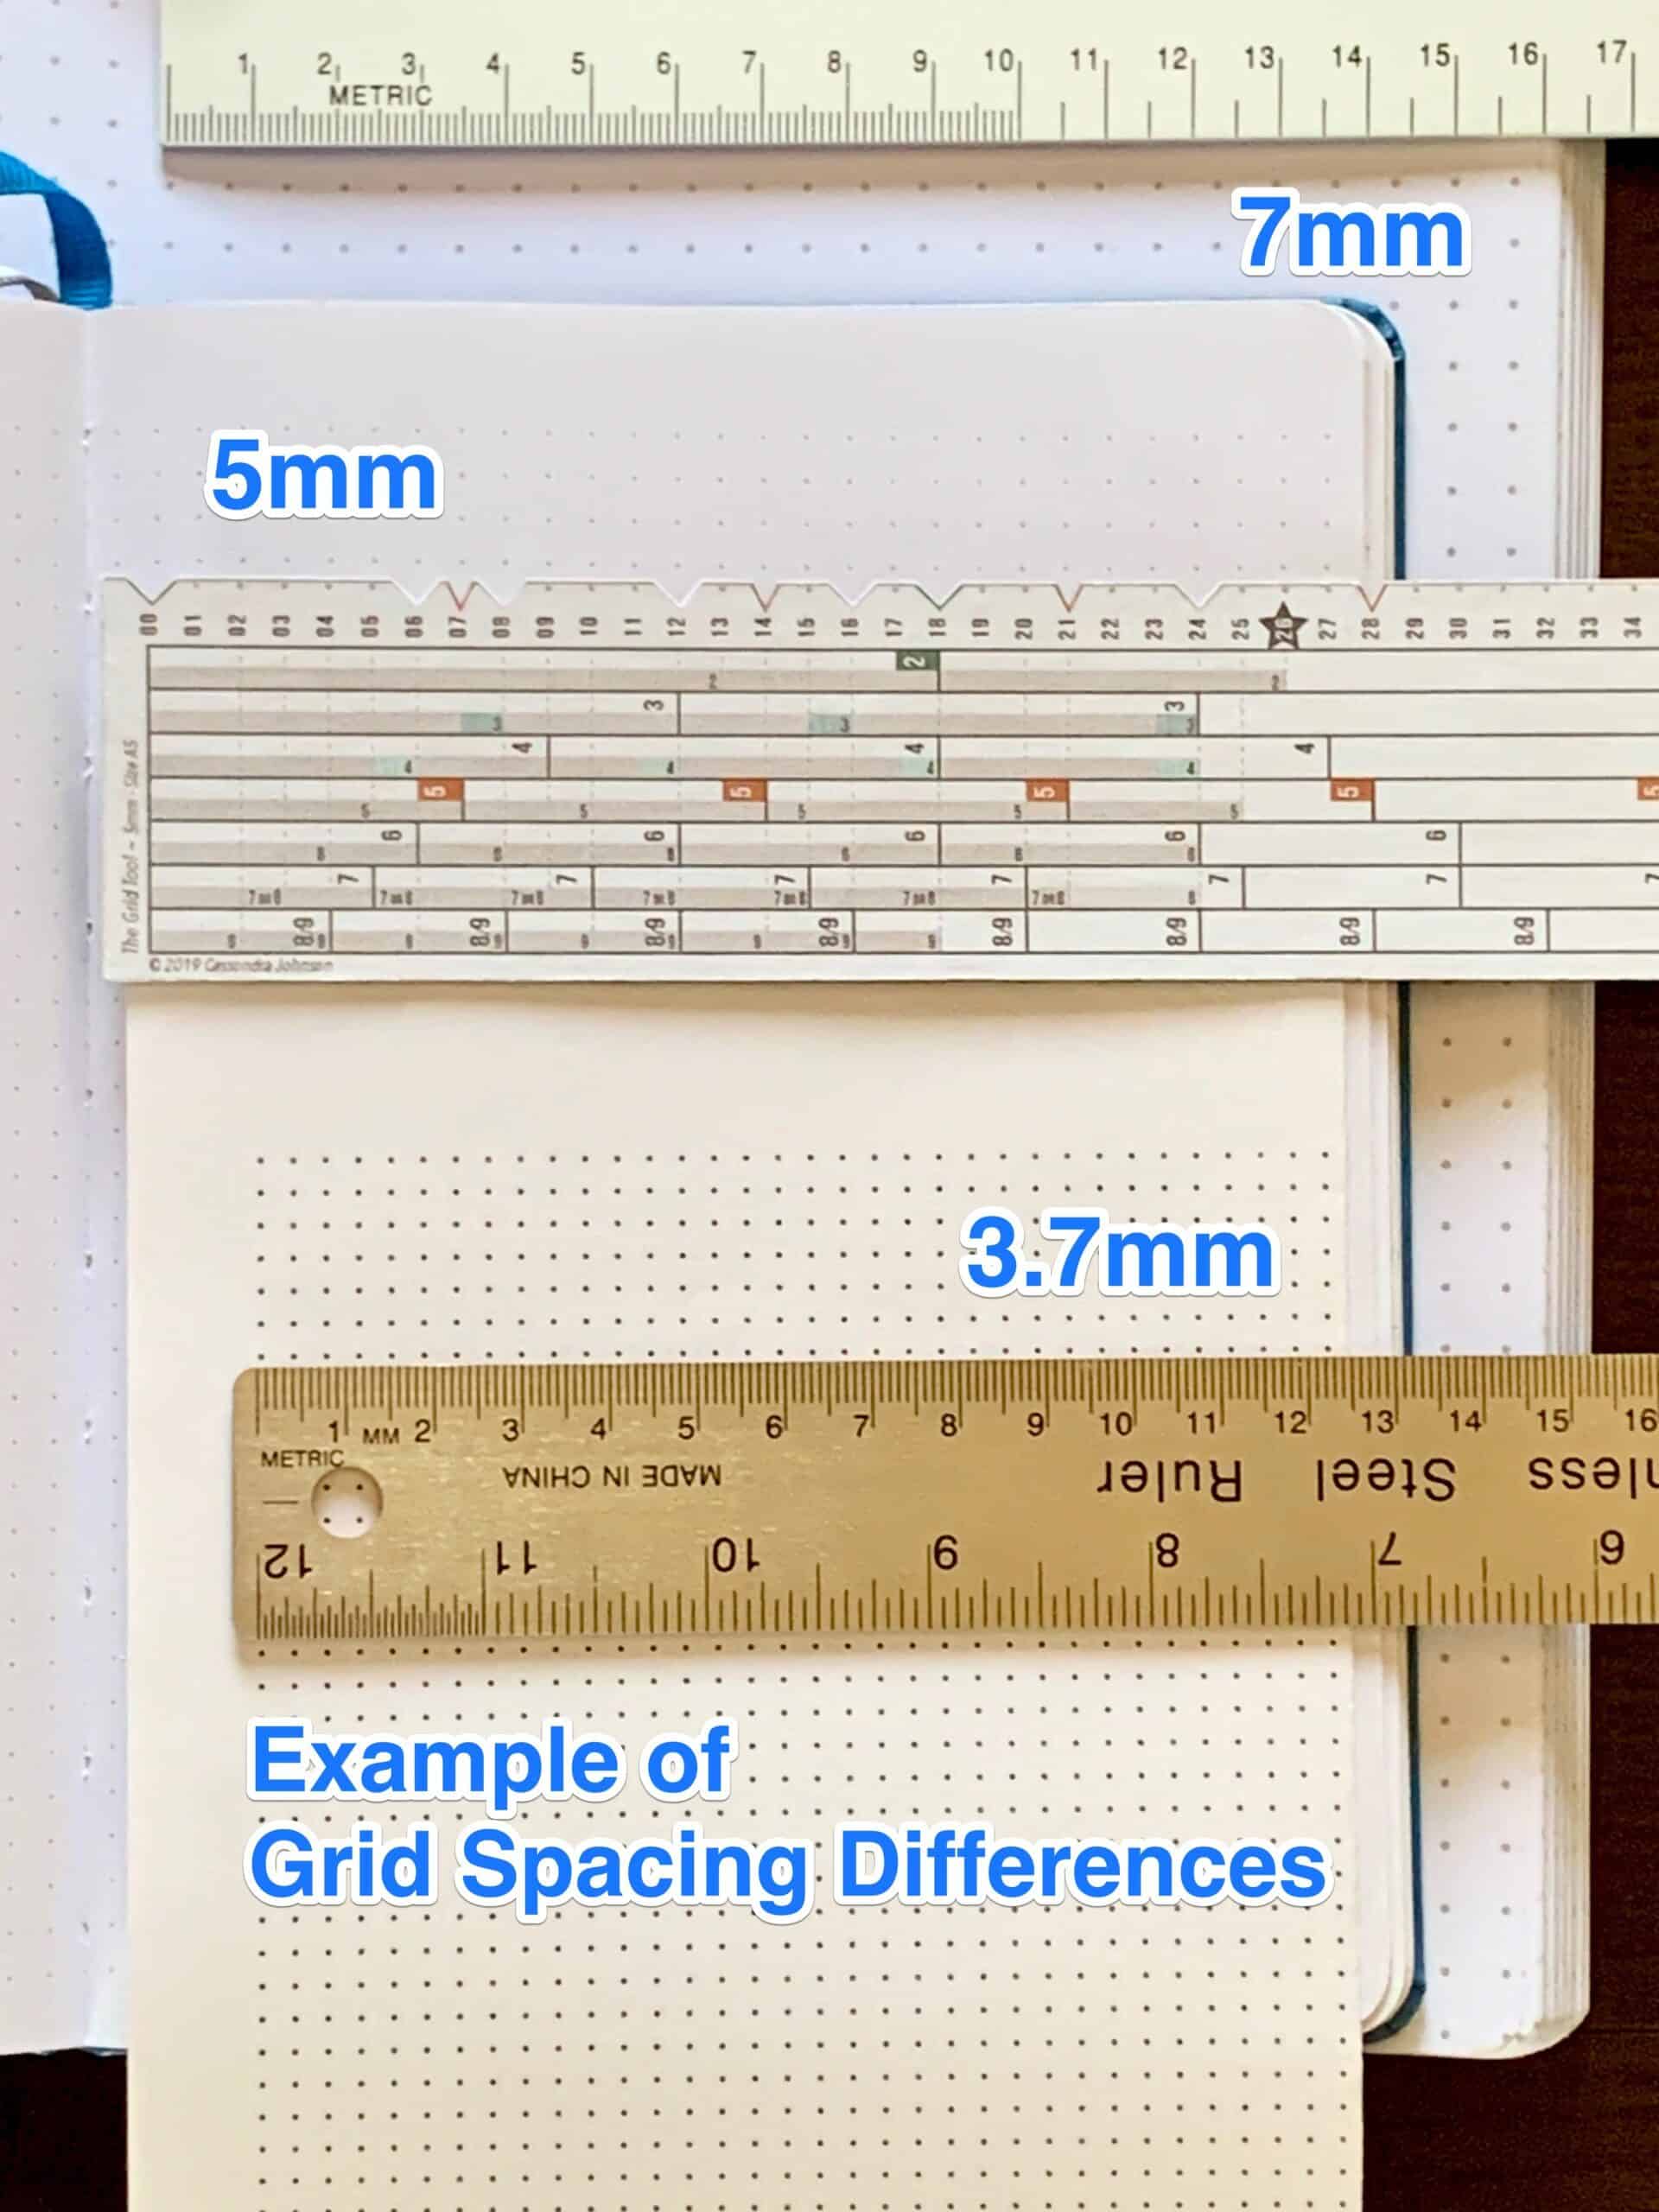 DIY GRID SPACING RULER FOR BULLET JOURNALS - Easy way to divide page into  rows and columns 